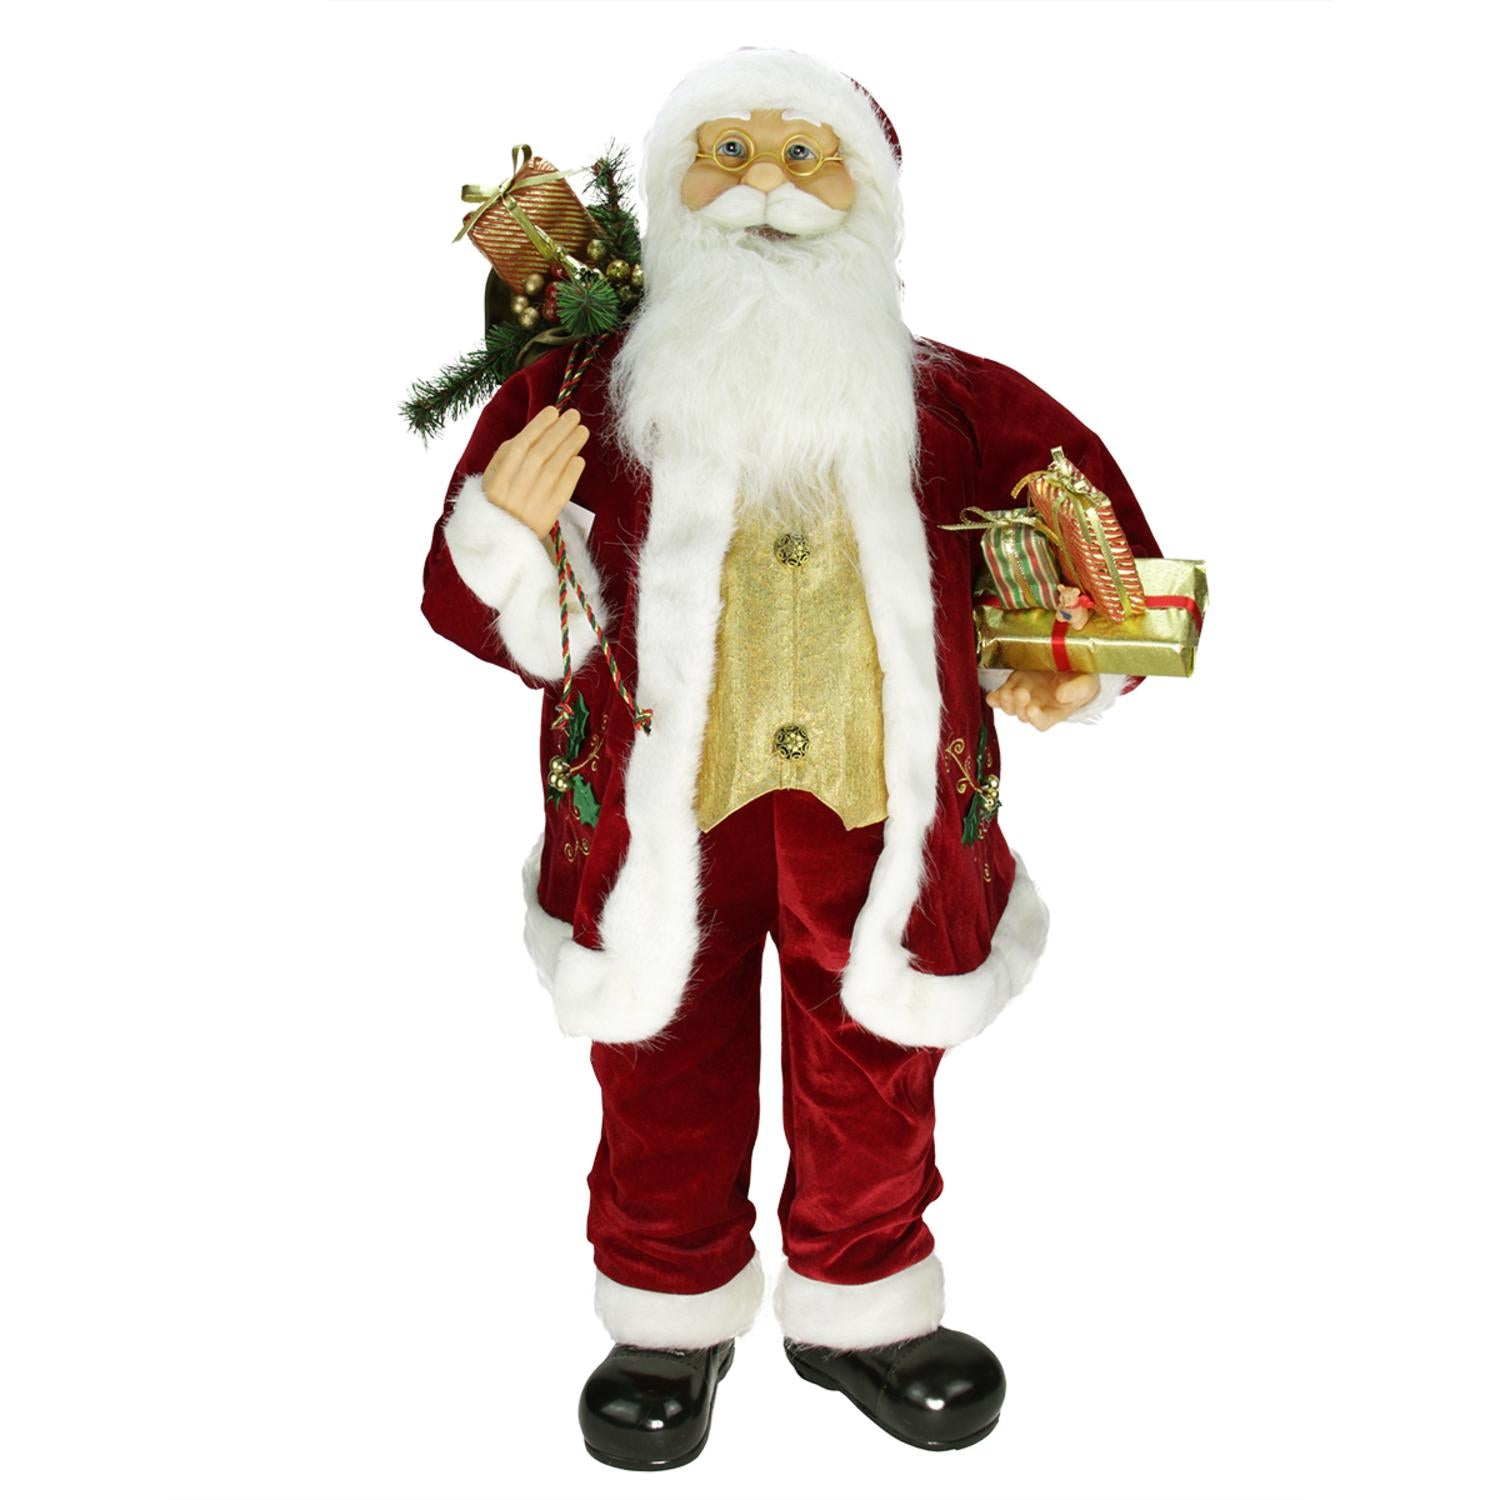 36" Traditional Holly Berry Standing Santa Claus Christmas Figure with Presents and Gift Bag